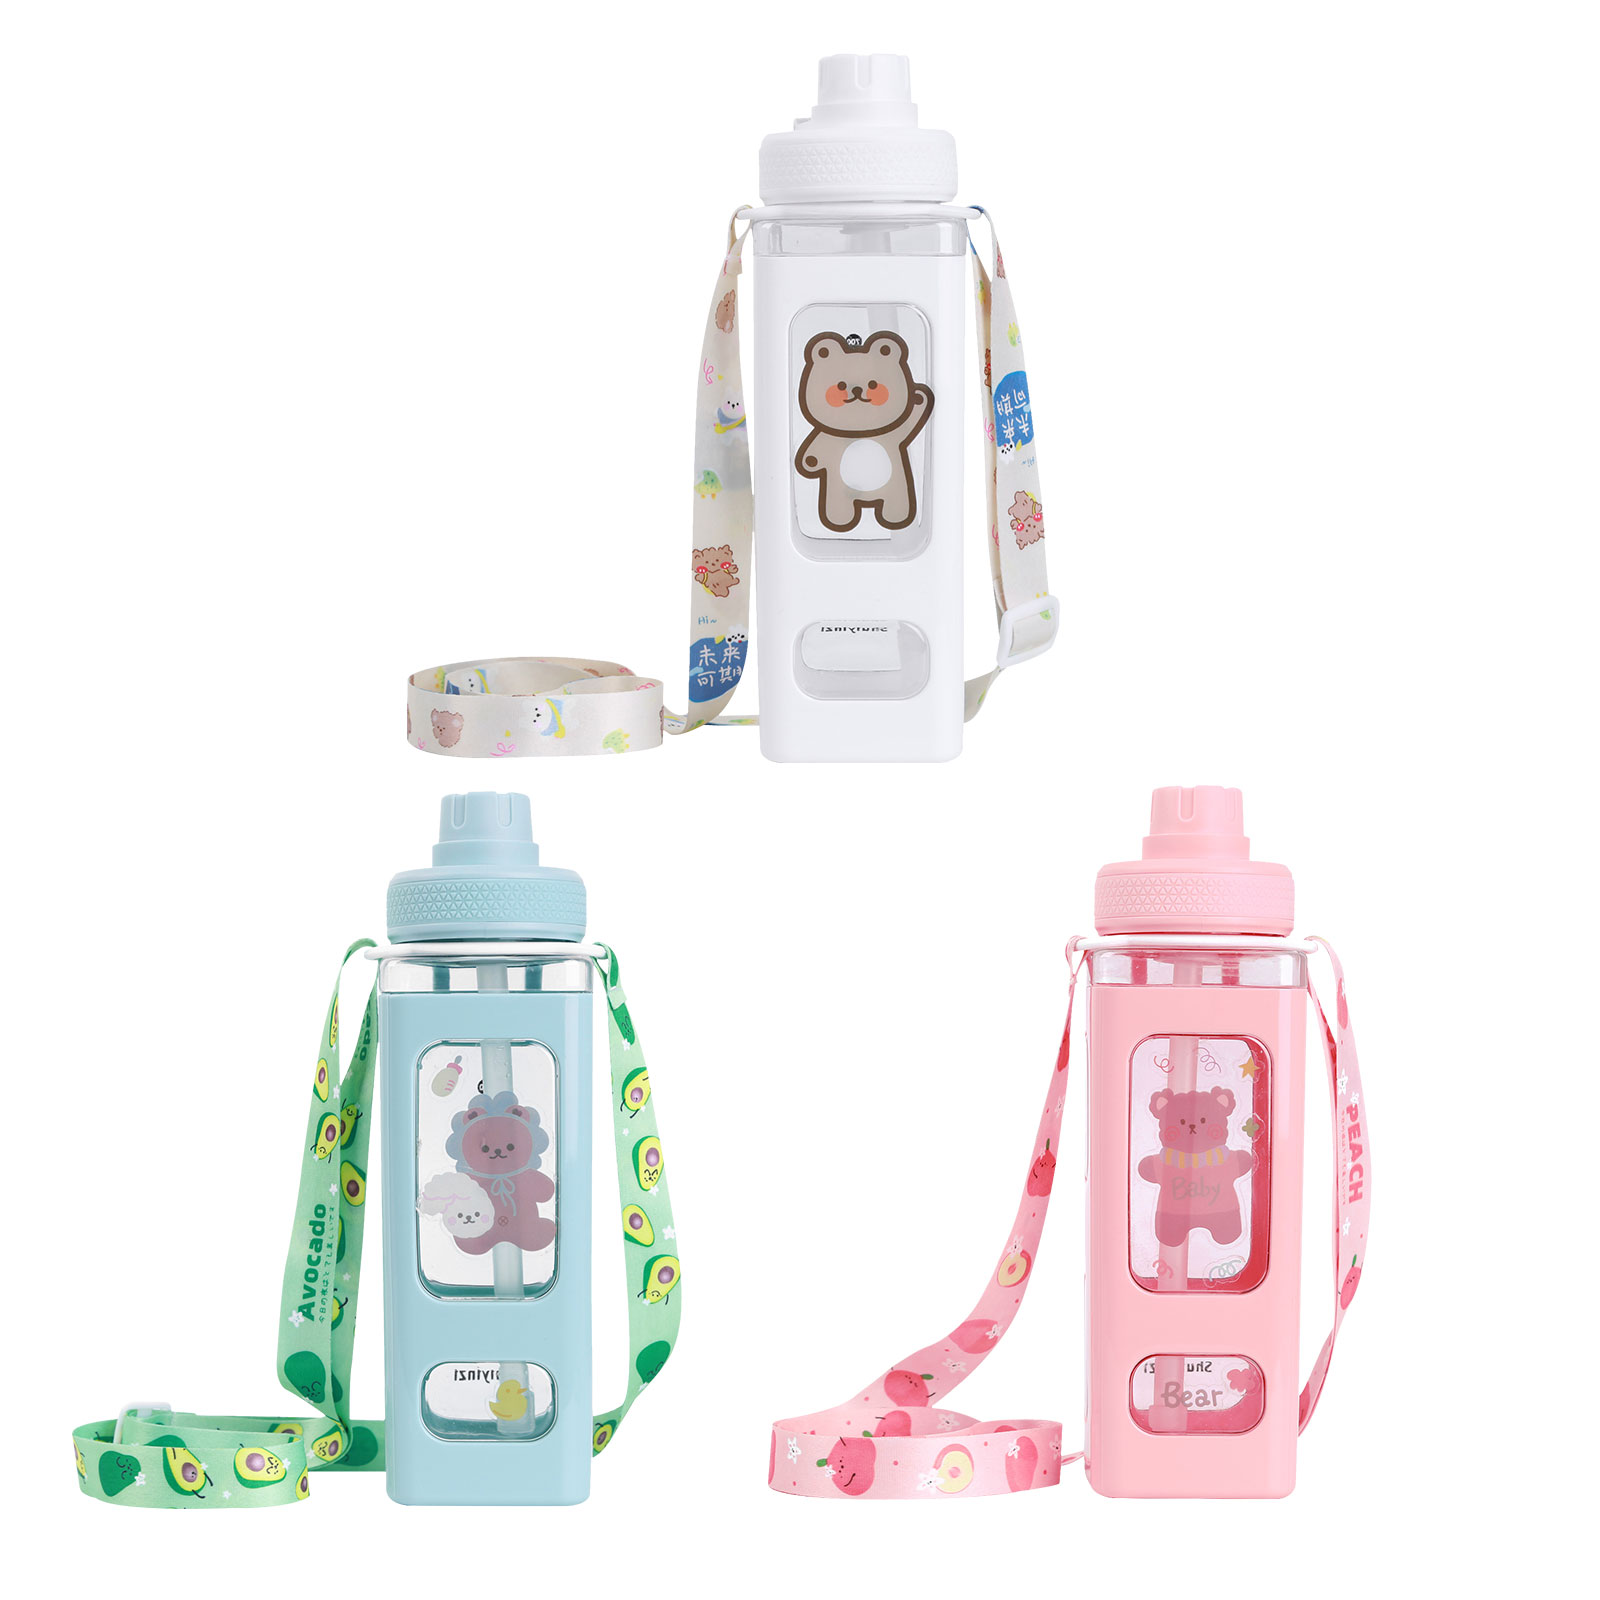 

Water Bottle with Straw - 700ml 24 Oz Drinking Bottle Square Cute Water Jug, White, 501 Original